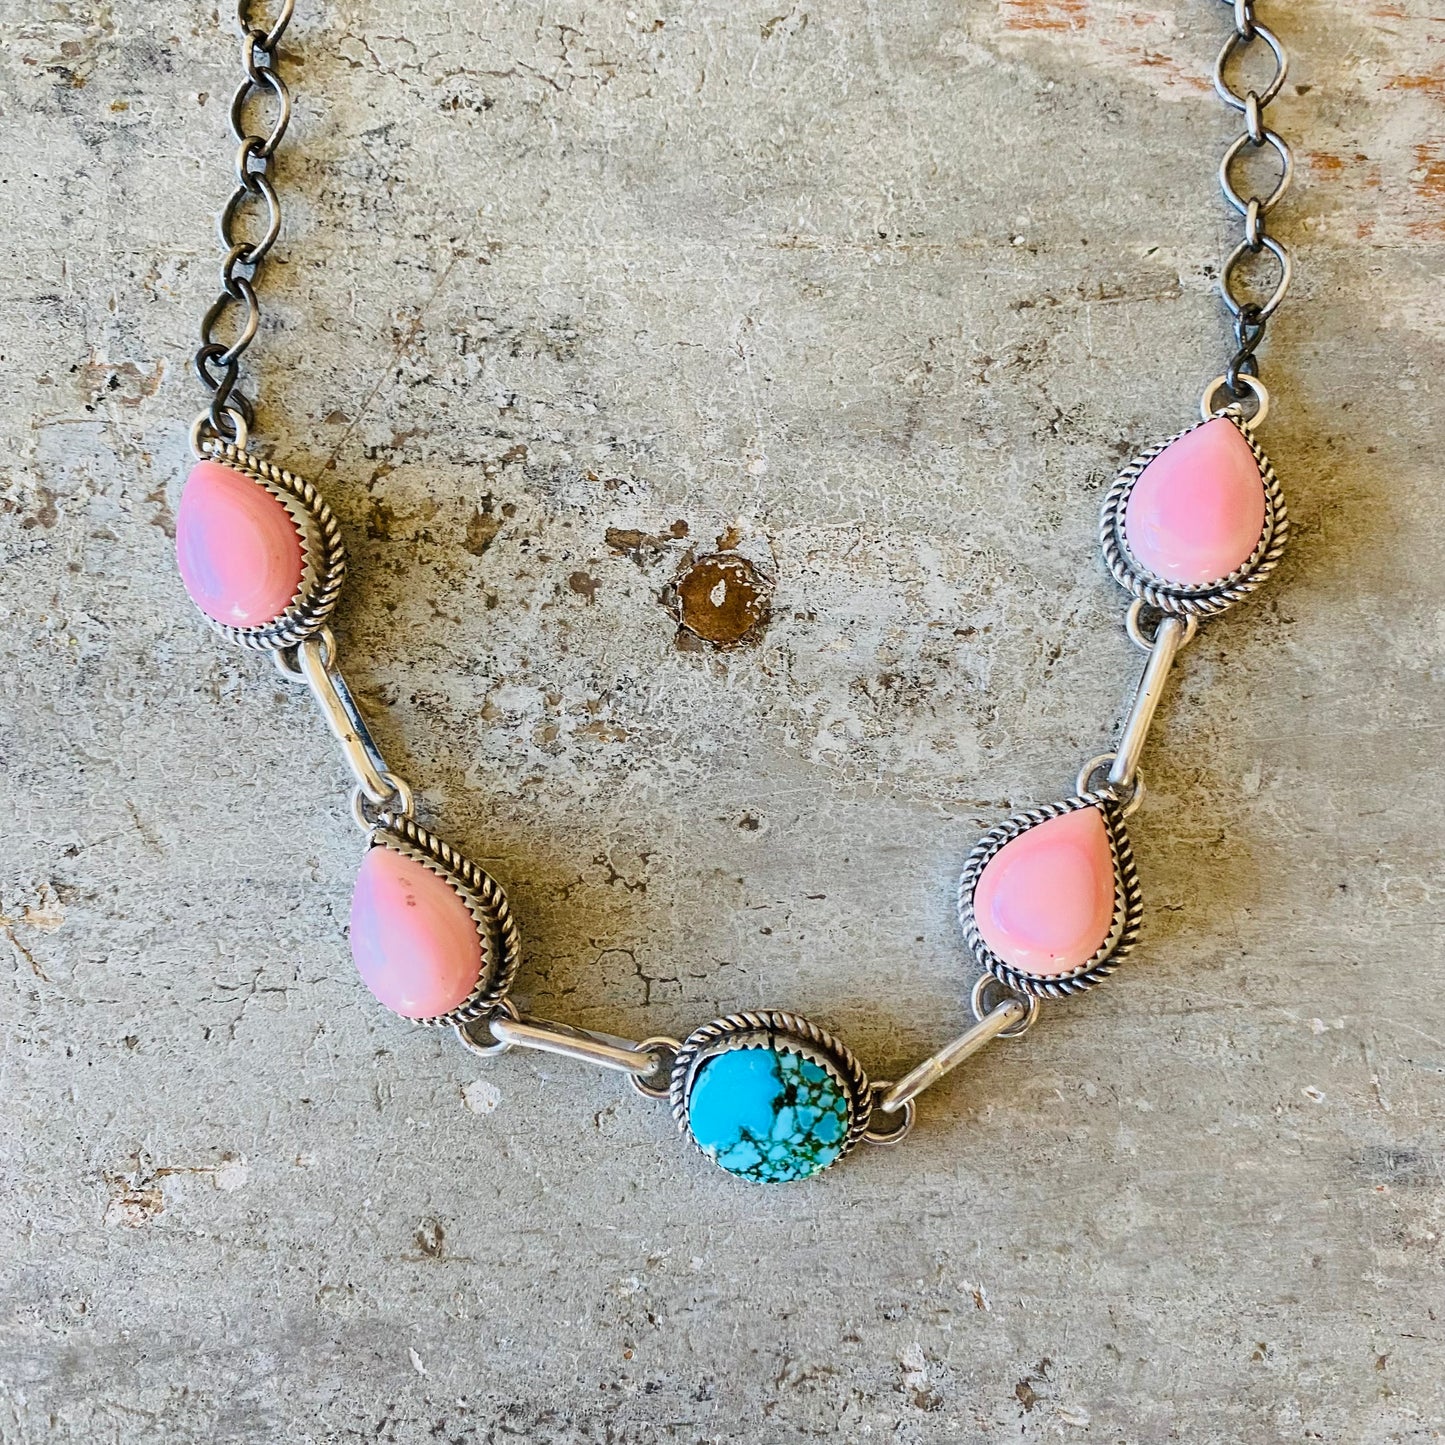 Navajo Tia Long Sterling Silver Pink Conch & Egyptian Turquoise Choker Necklace